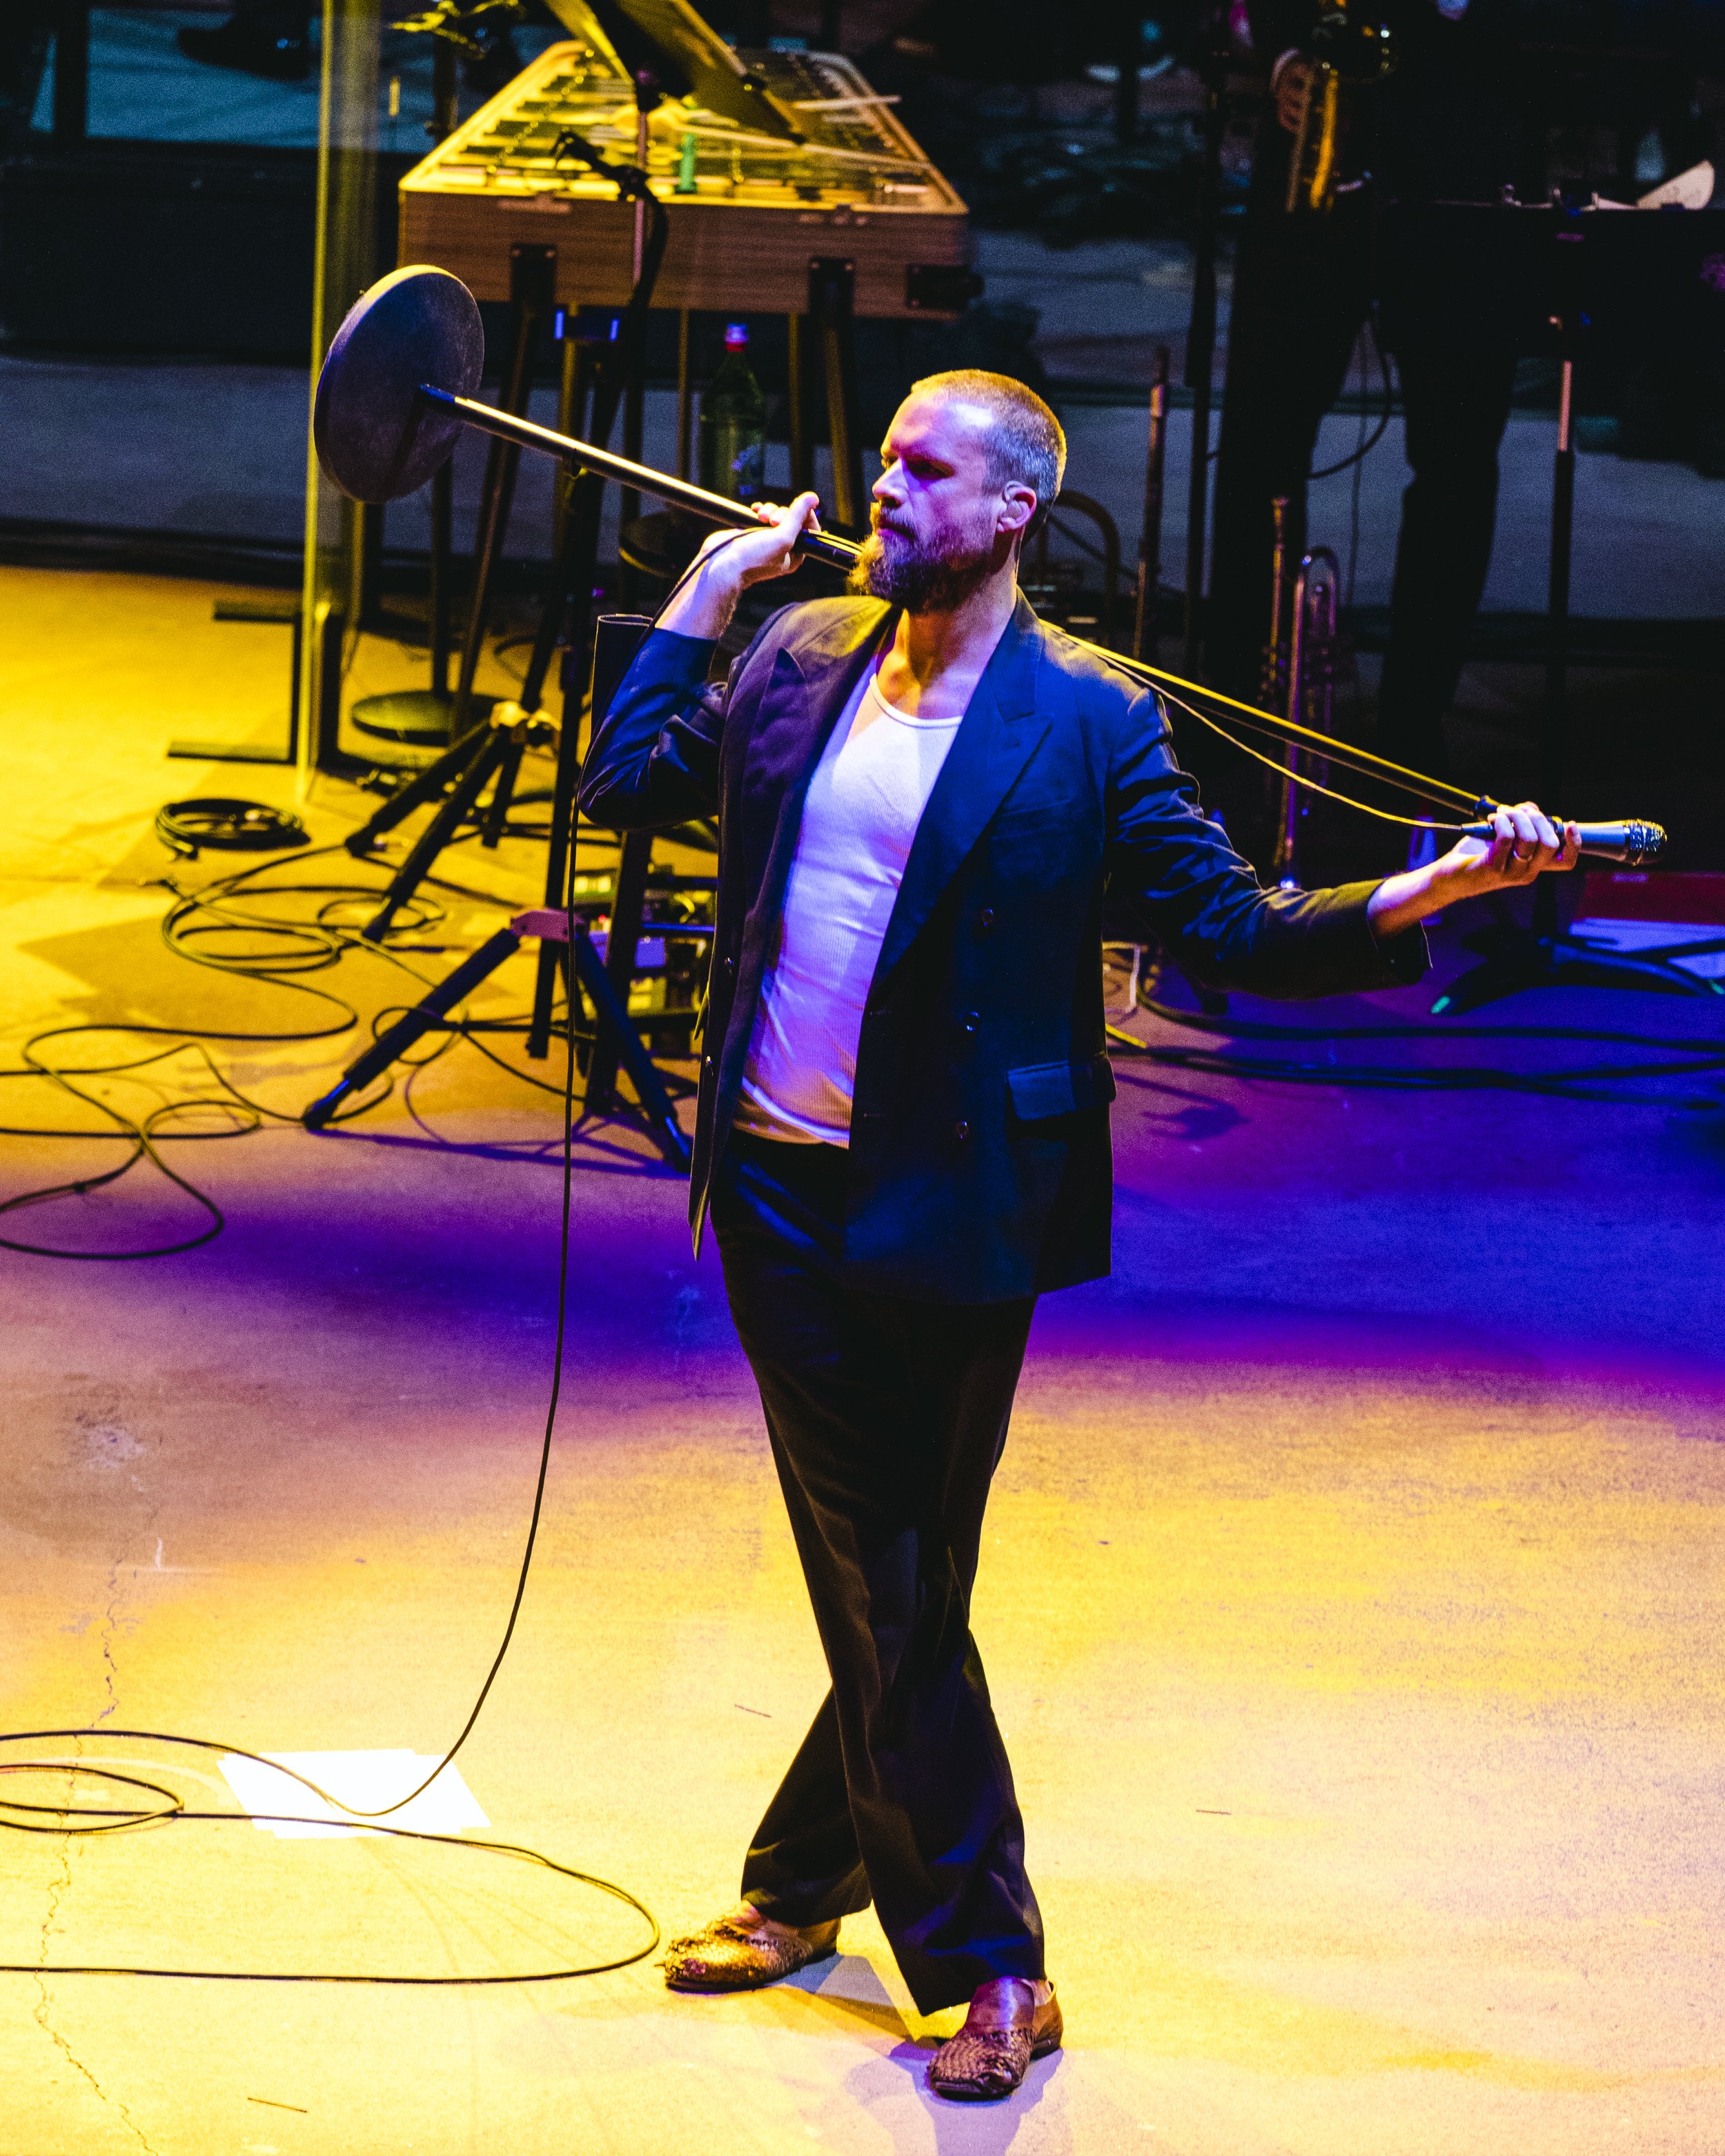 FATHER JOHN MISTY WITH THE COLORADO SYMPHONY - Red Rocks Amphitheatre - Morrison, Colorado - Sunday, July 31, 2022 - PHOTO BY Mowgli Miles of Interracial Friends-24.JPG